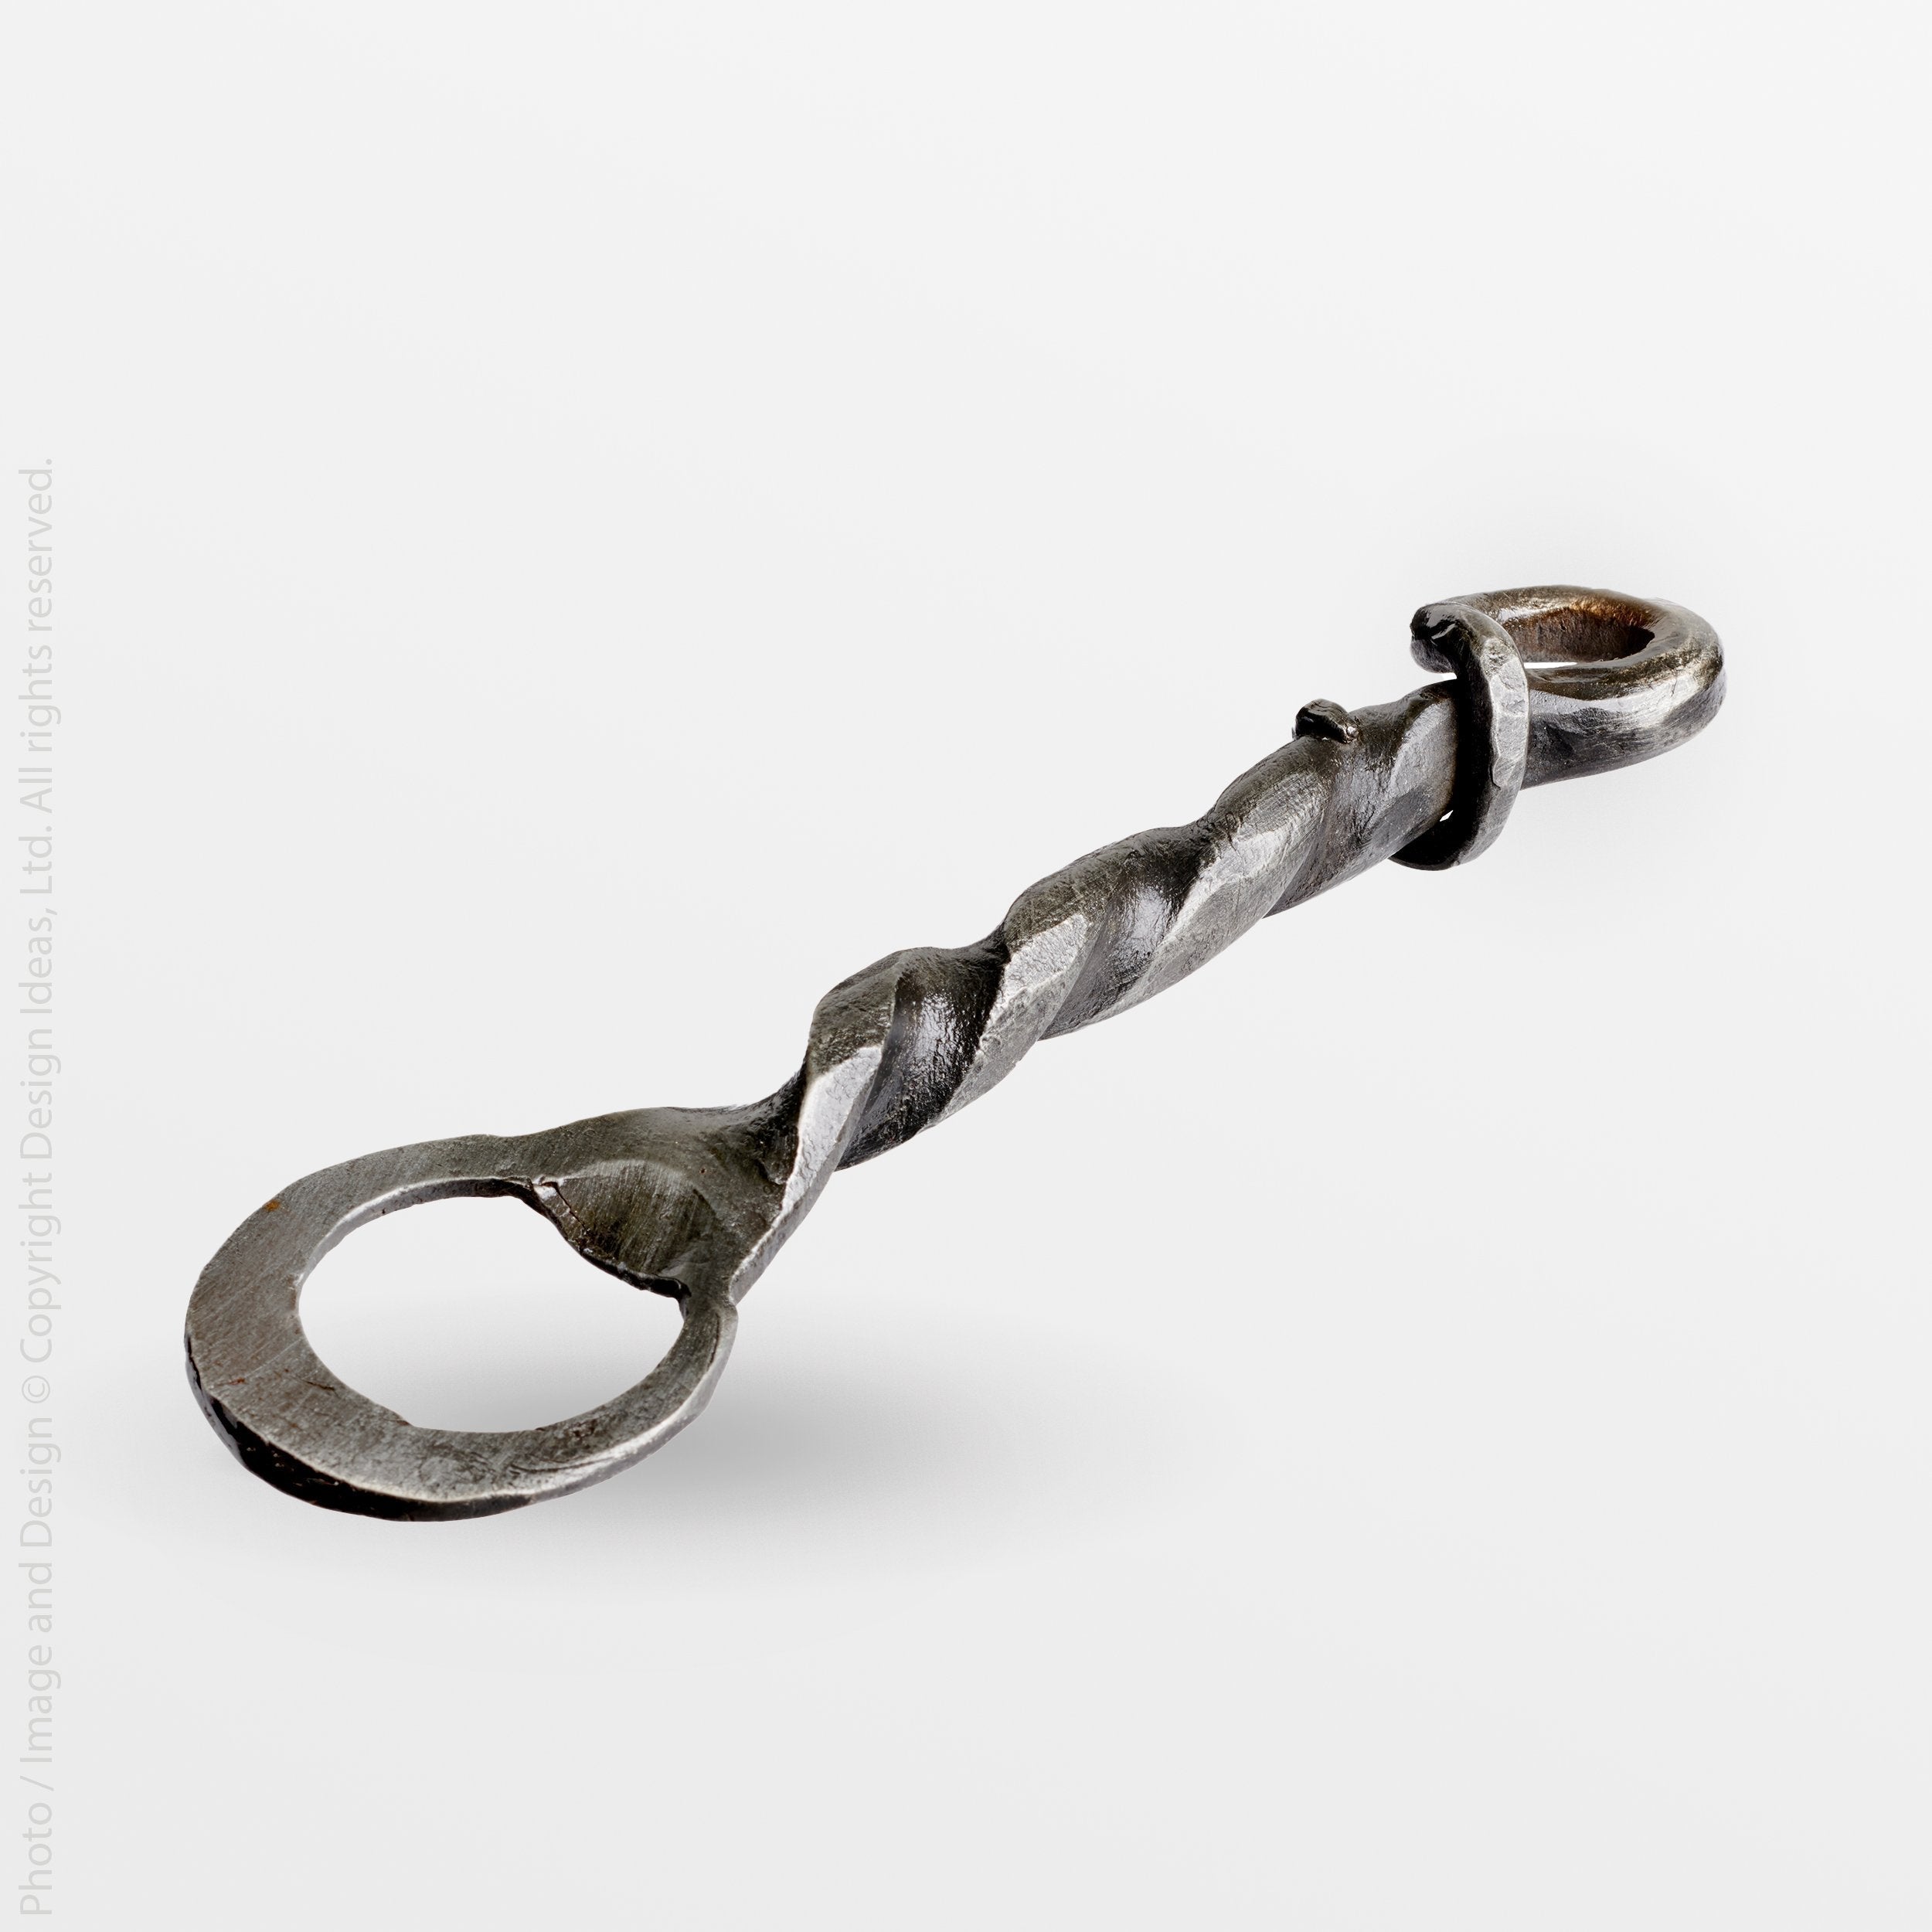 Brummel™ Hand Forged Stainless Steel Bottle Opener - Silver | Image 3 | Premium Bottle Opener from the Brummel collection | made with Stainless Steel for long lasting use | texxture